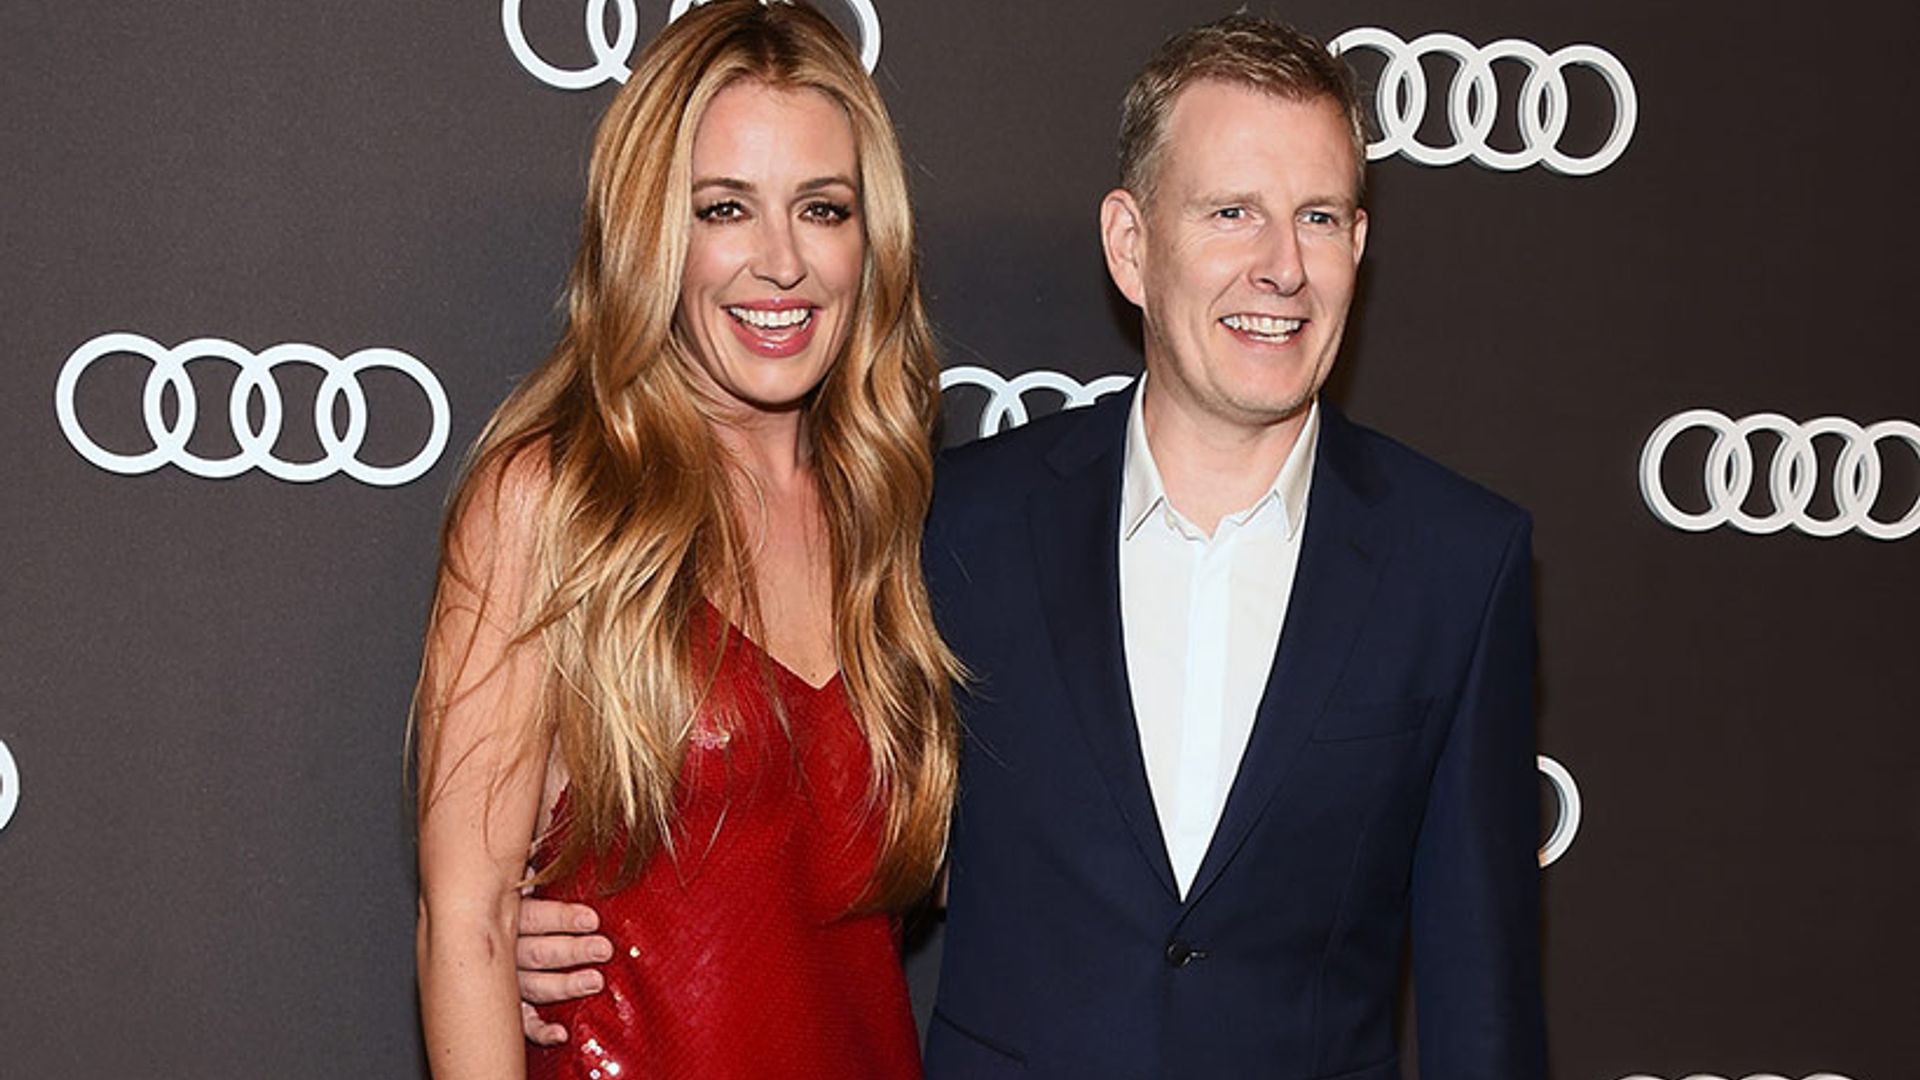 Loved-up Cat Deeley and Patrick Kielty make rare appearance together at event